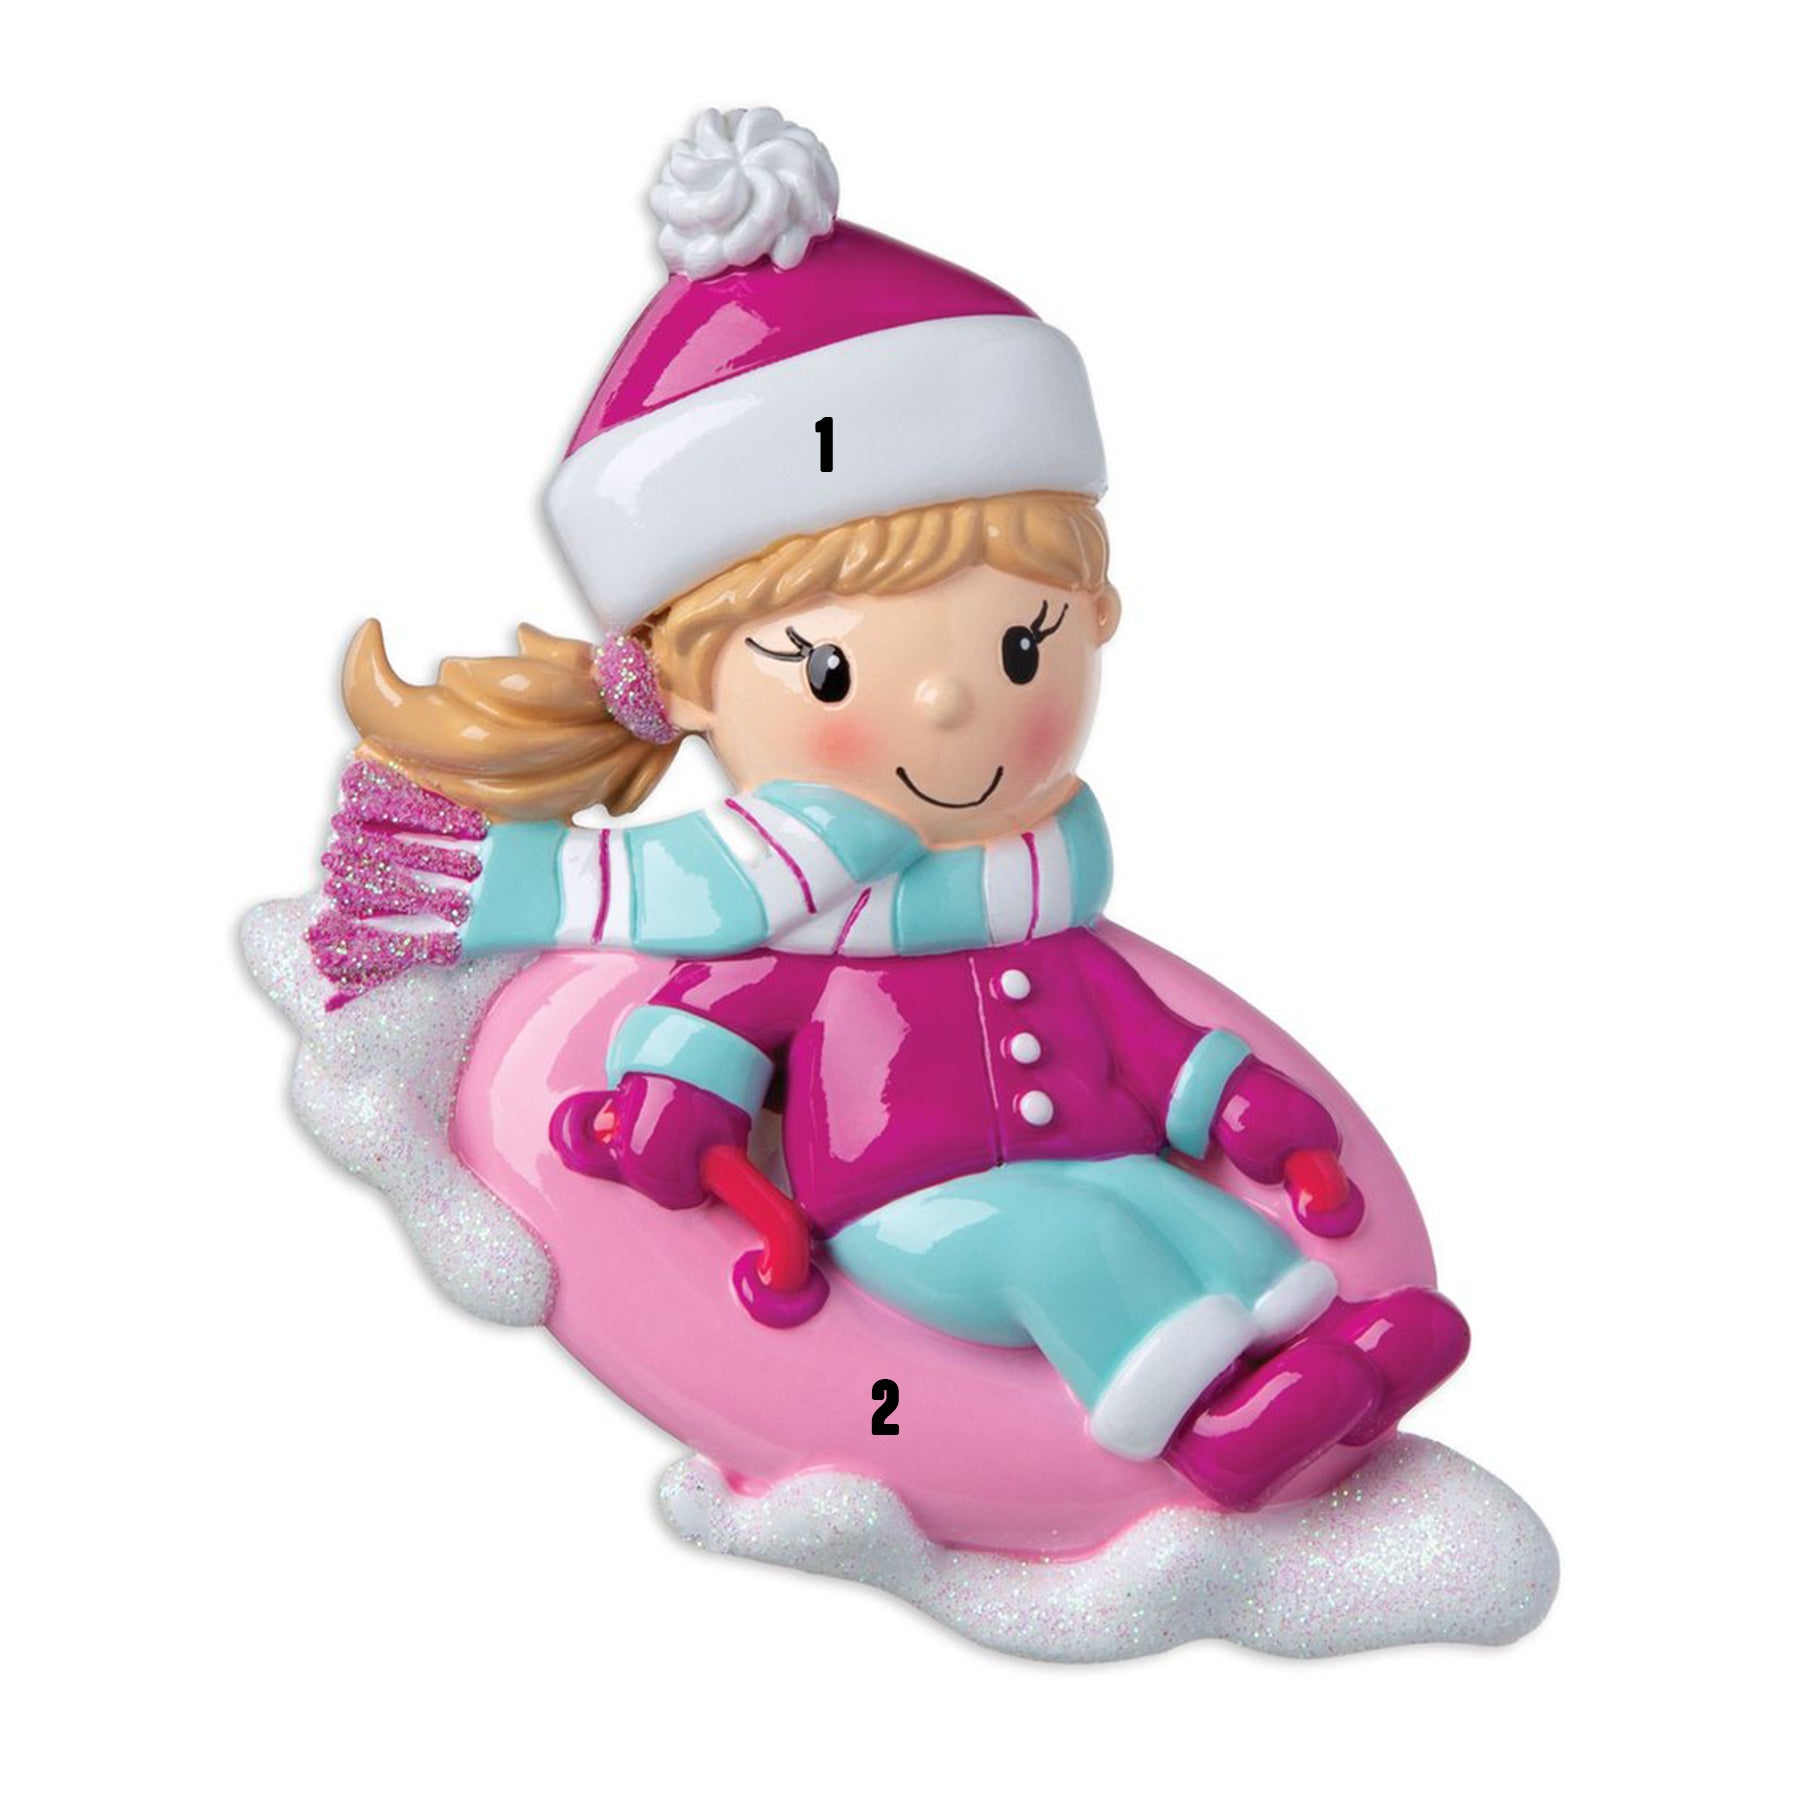 Snow Tubing Pink - The Hills are Calling (7471030501550)